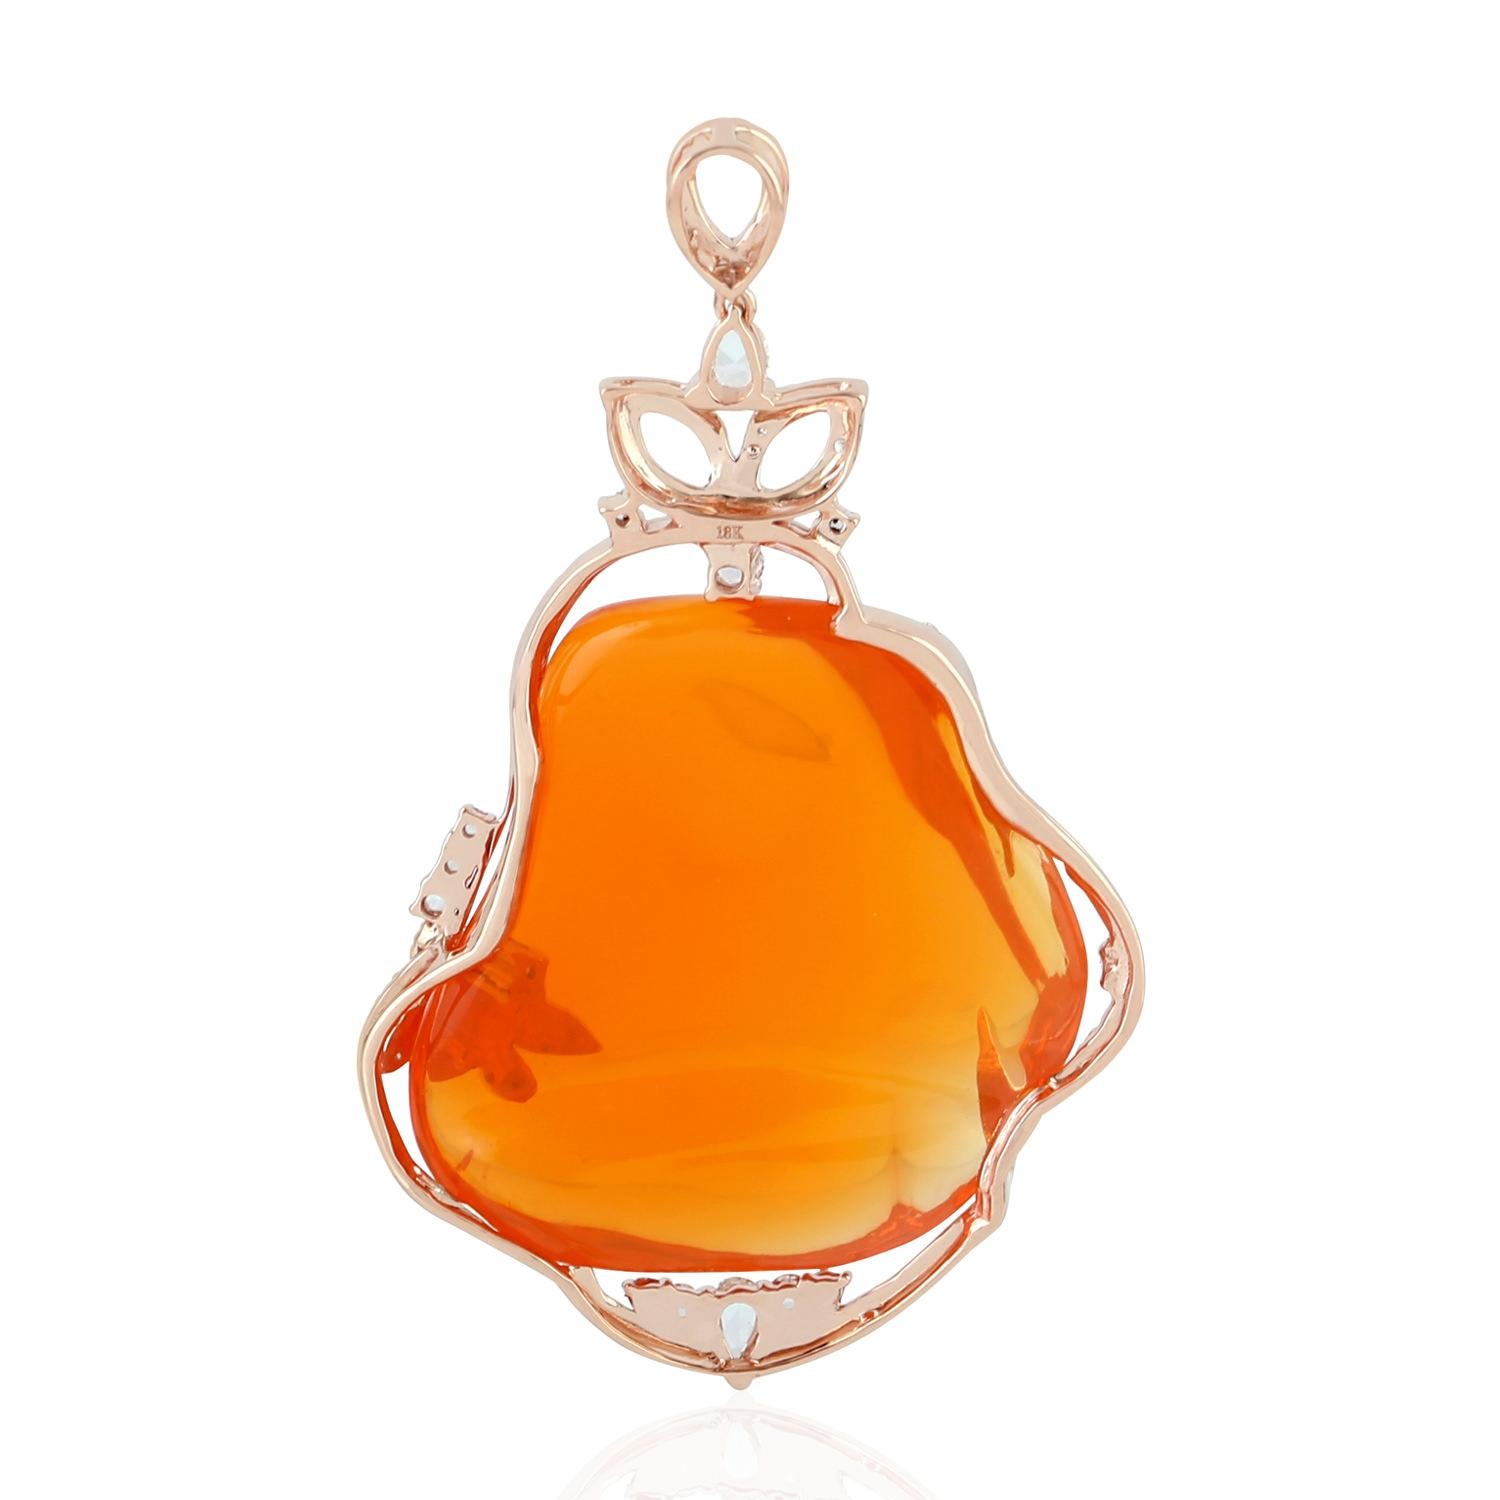 Cast in 18 Karat gold, this beautiful pendant features 54.64 carats of fire opal & 1.4 carats of sparkling diamonds.  

FOLLOW  MEGHNA JEWELS storefront to view the latest collection & exclusive pieces.  Meghna Jewels is proudly rated as a Top